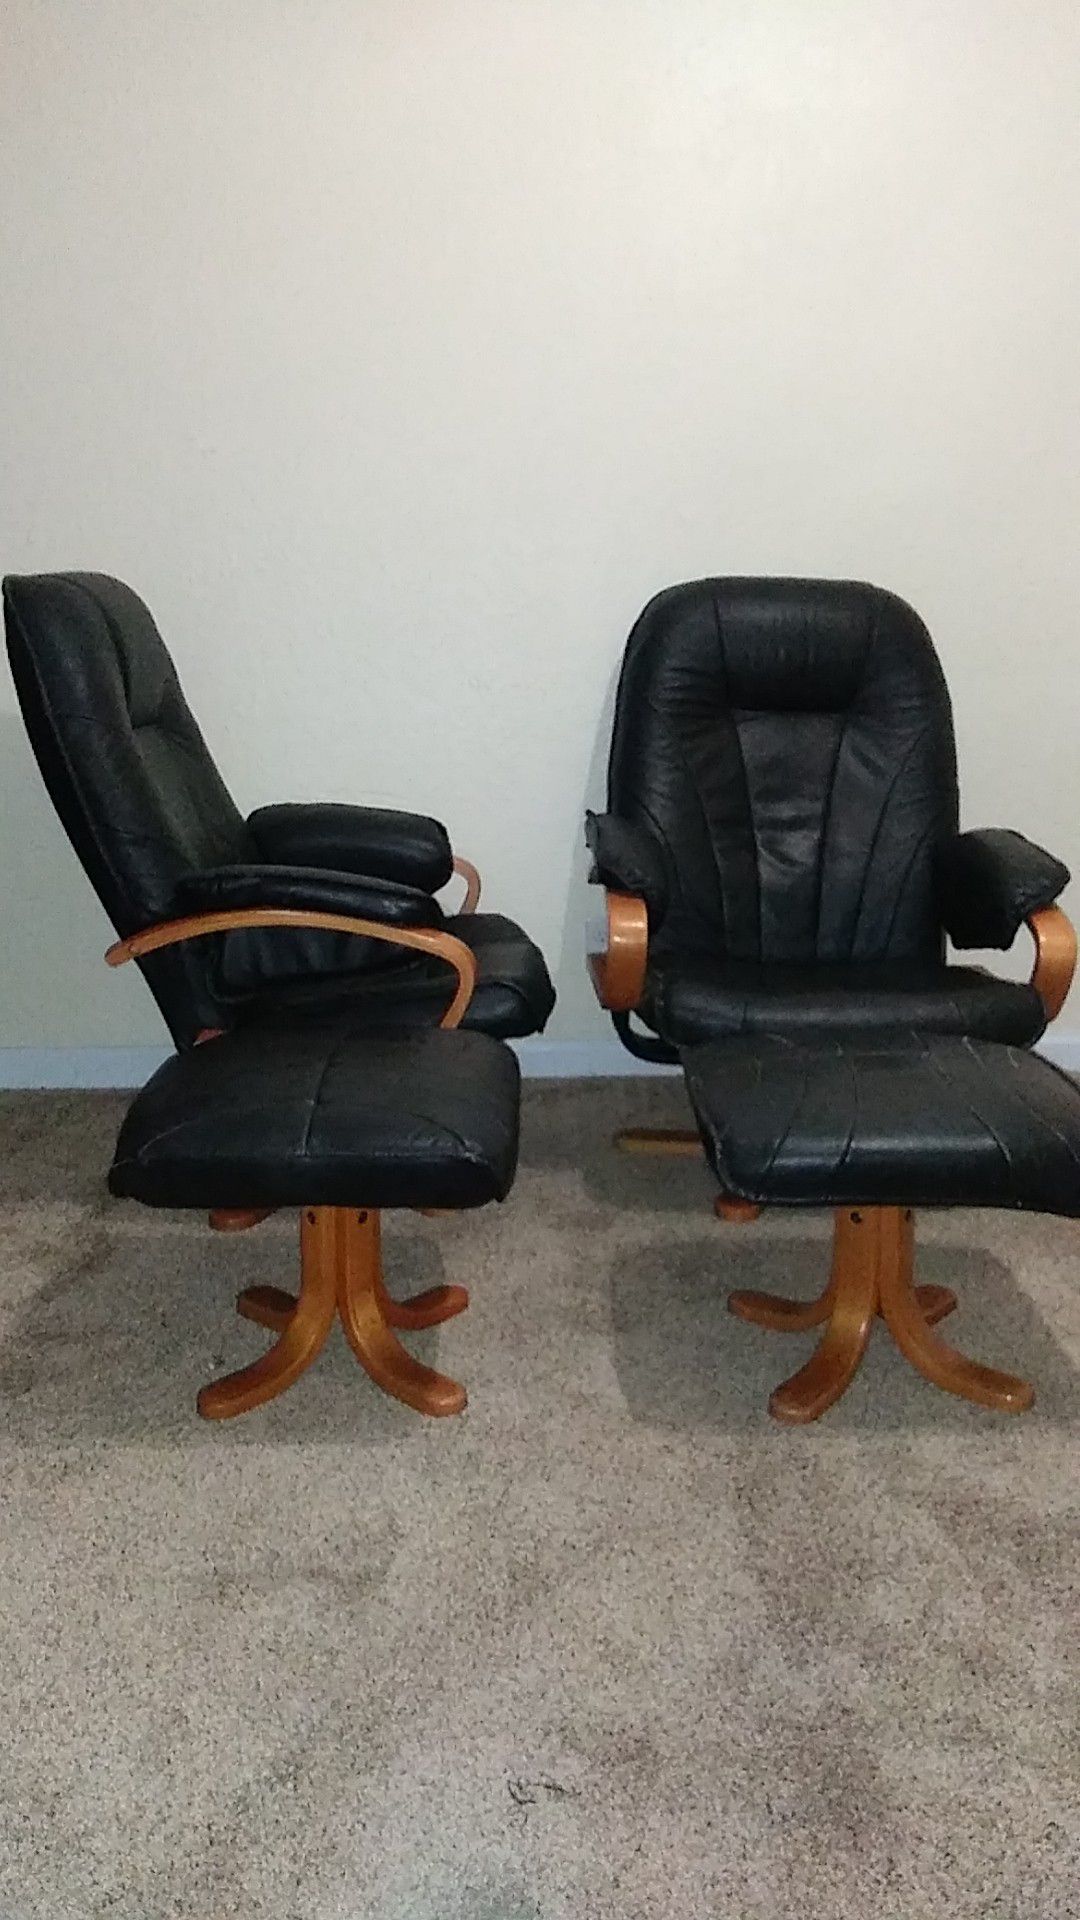 2 -Blk Leather Gamer🎮Chairs w/ Ottomans